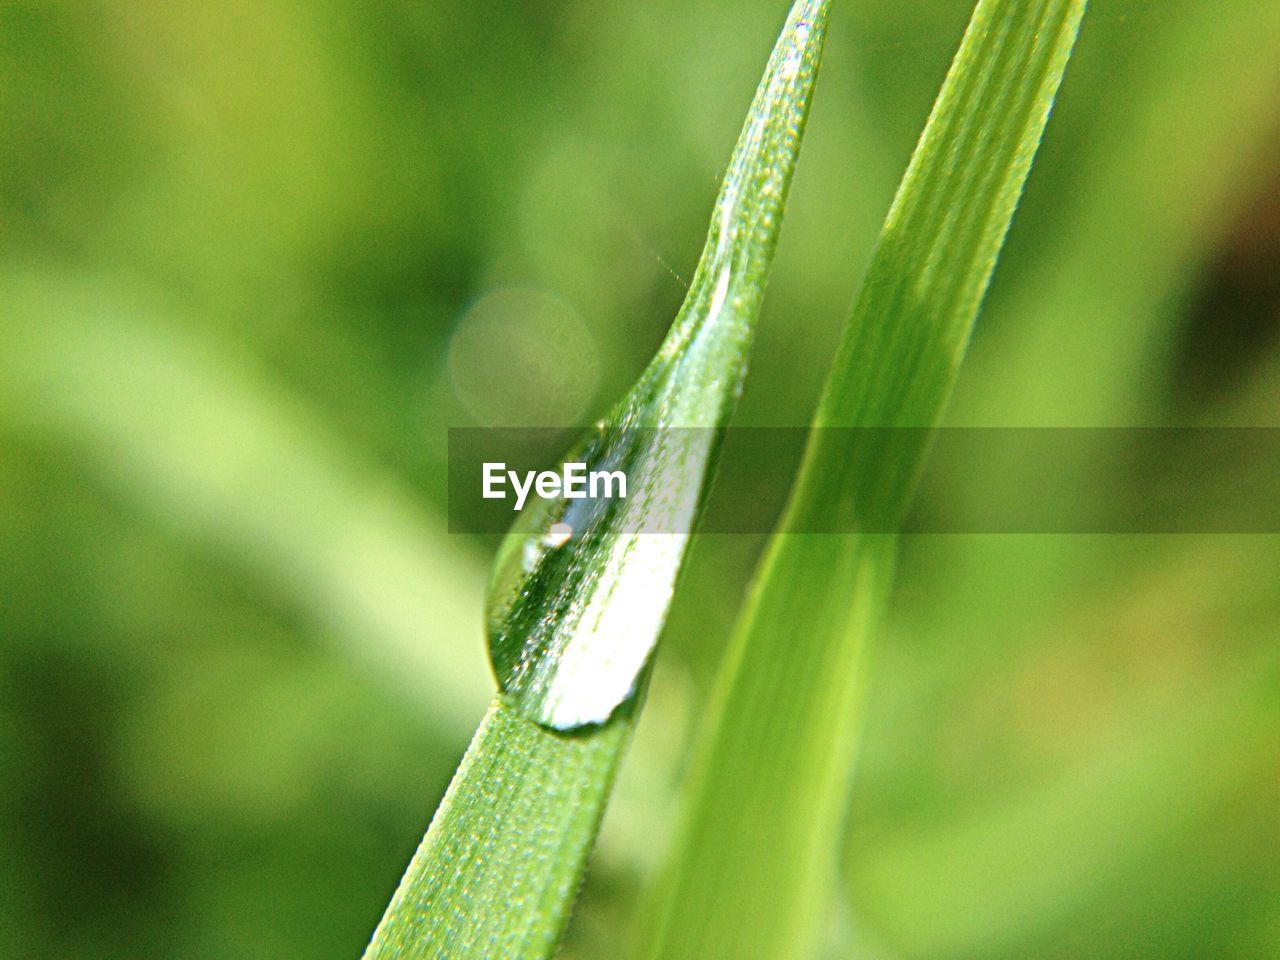 Close-up of dew on blade of grass